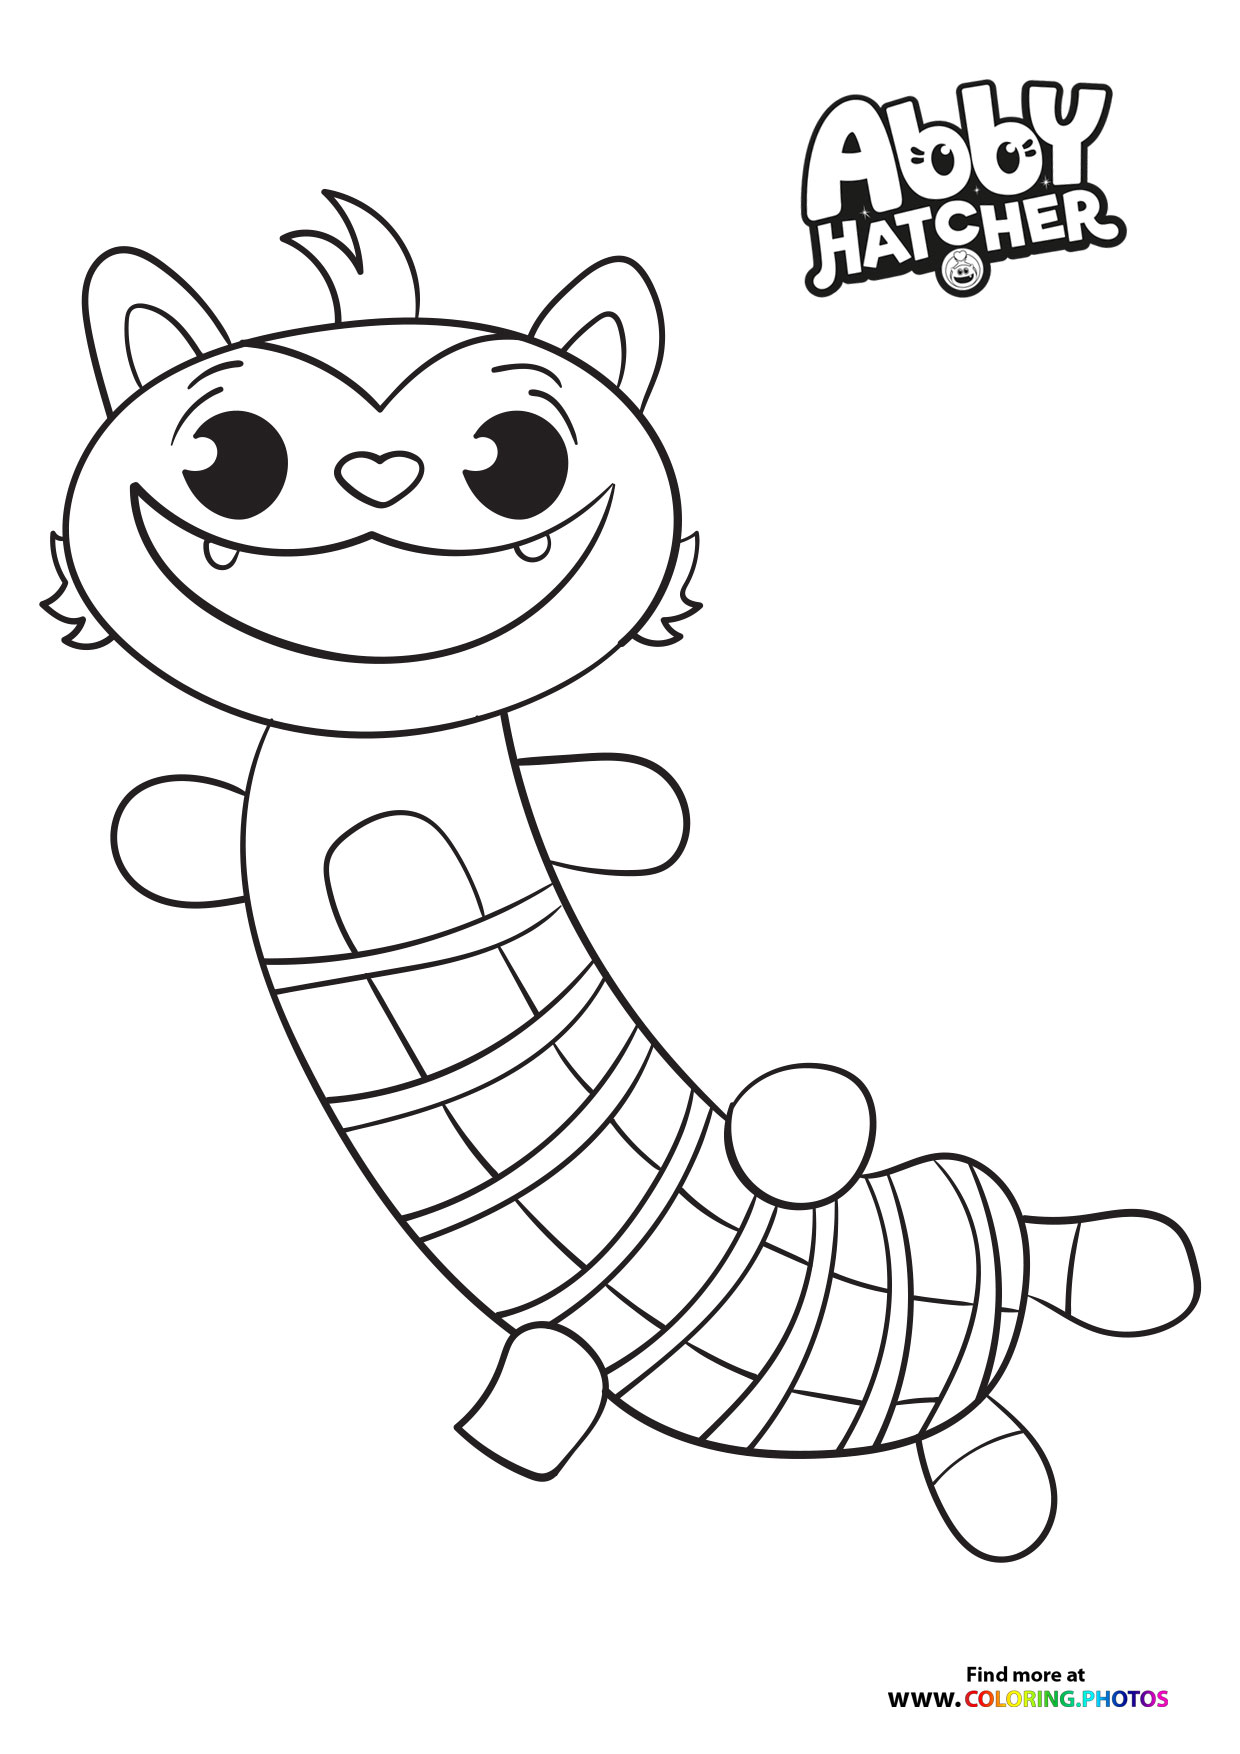 mo-from-abby-hatcher-coloring-pages-for-kids